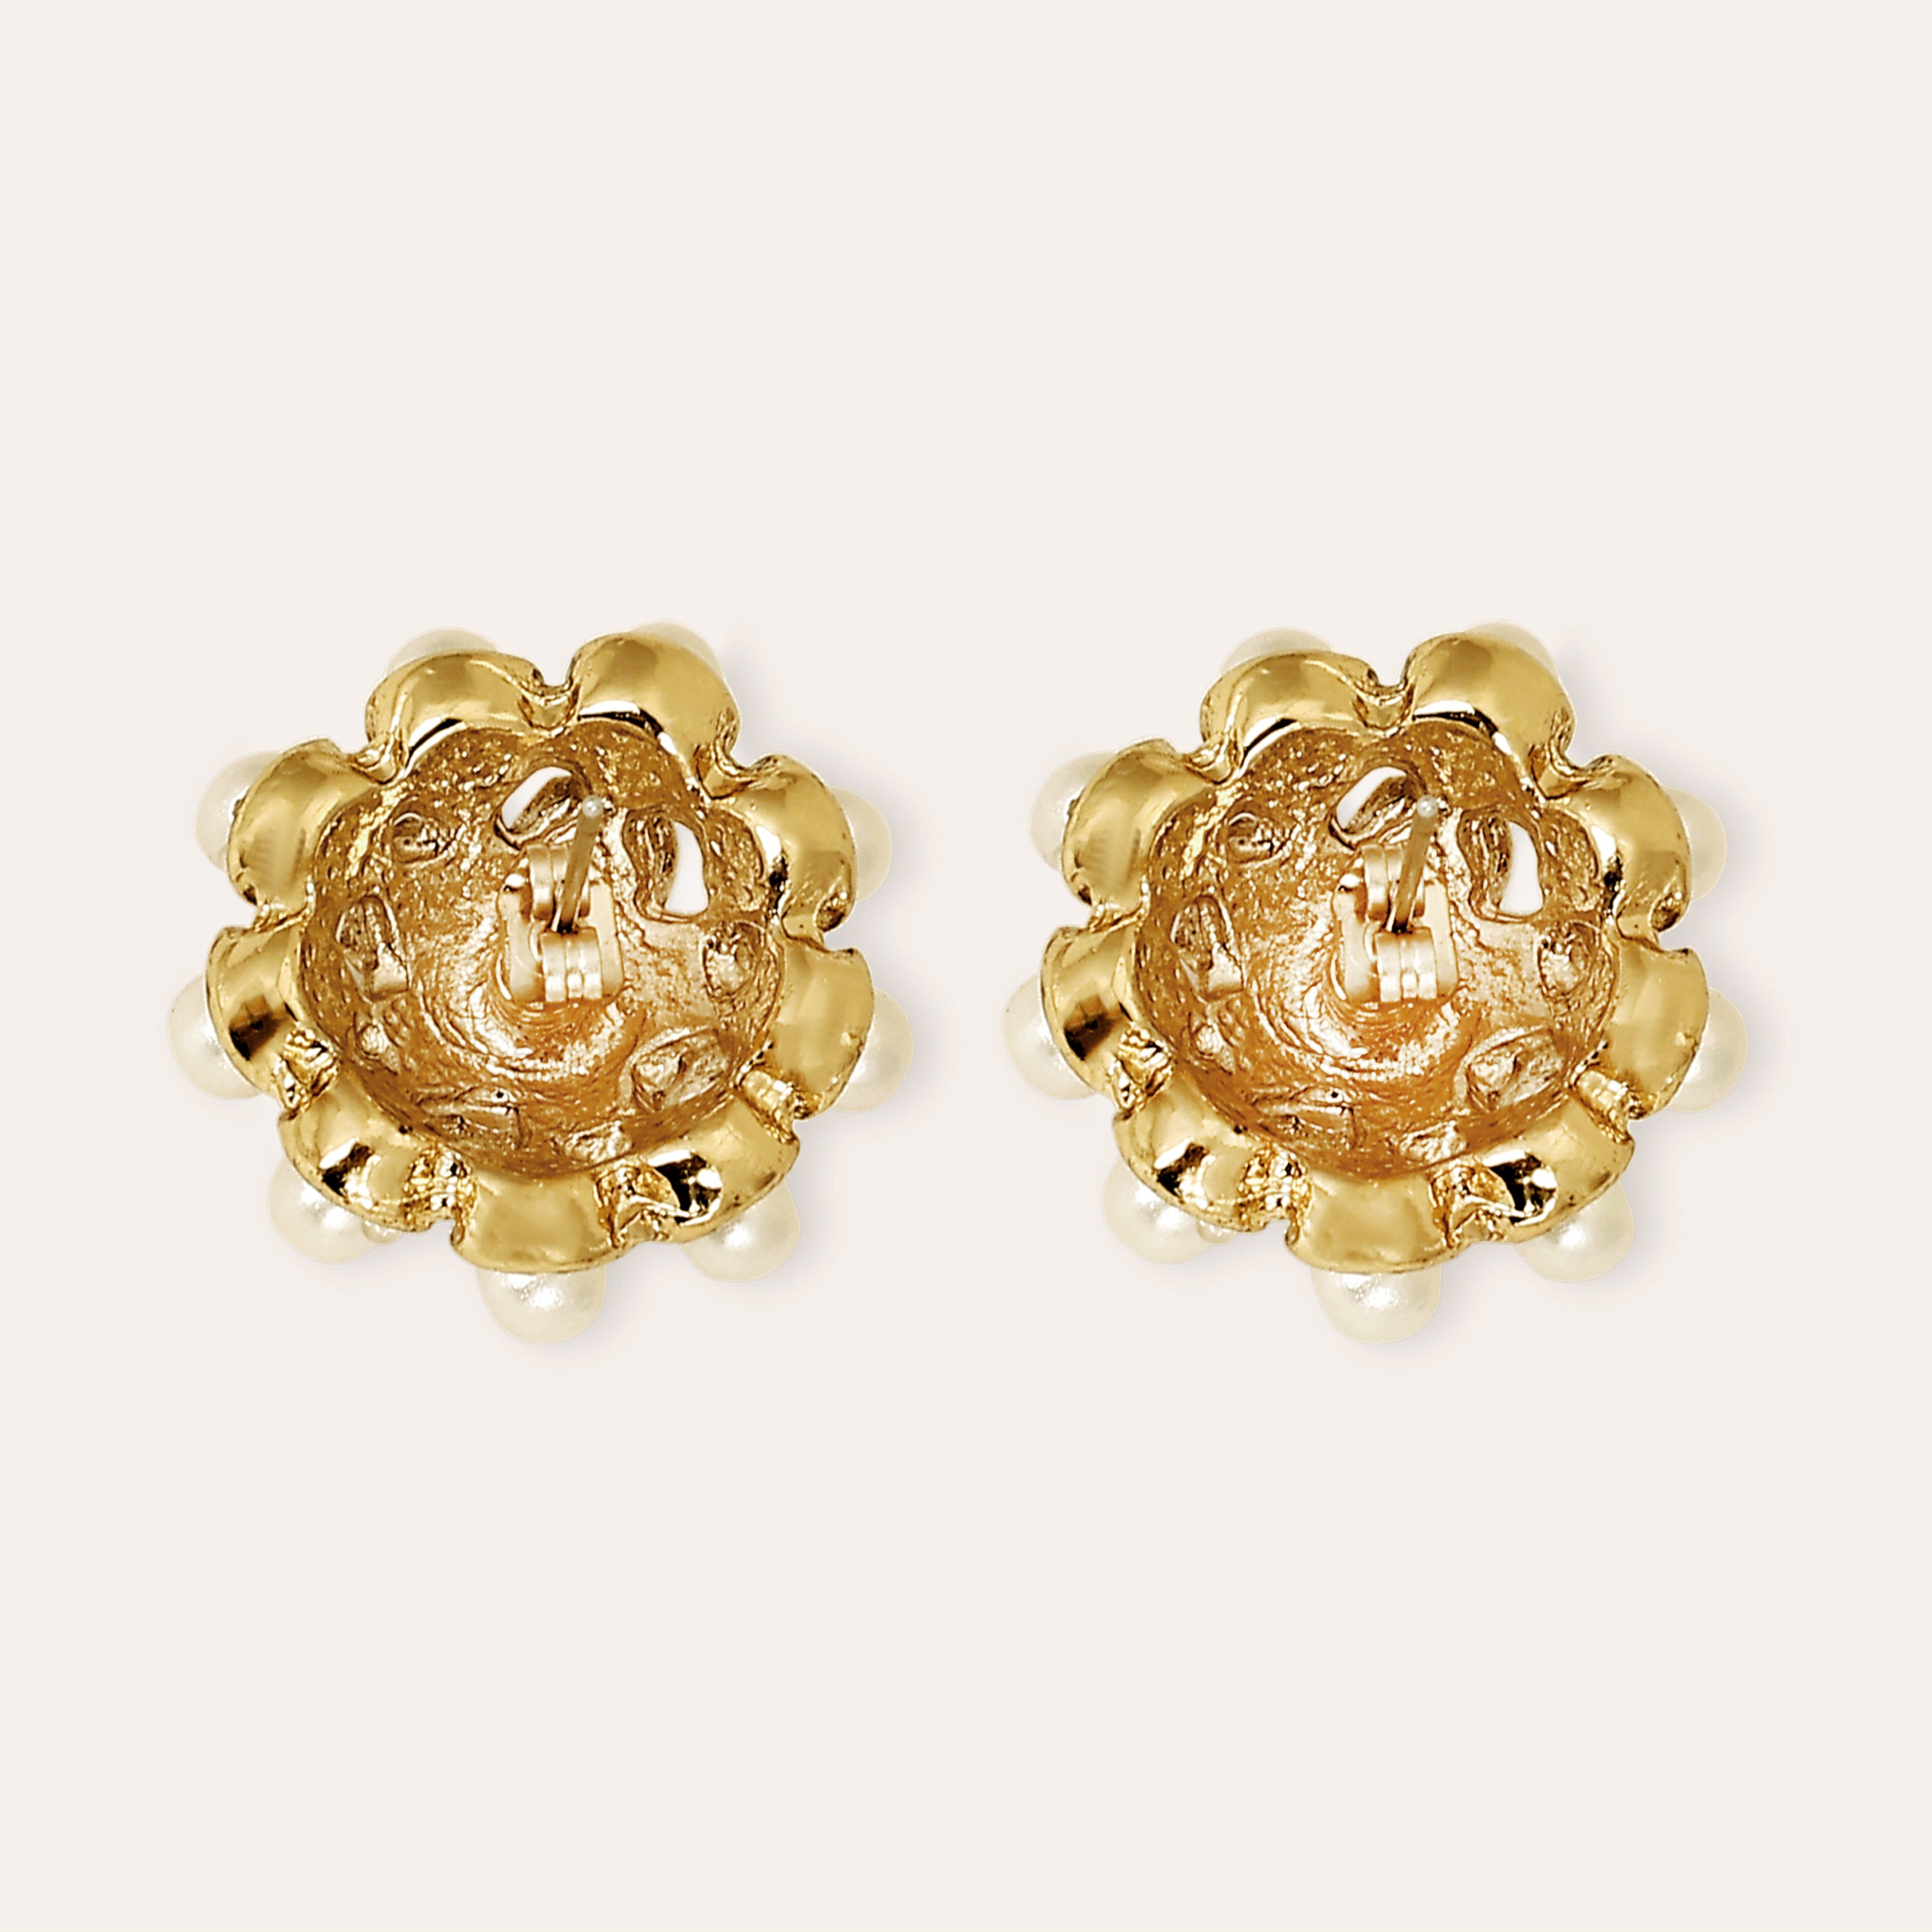 TFC PearlPop Gold Plated Earrings-Discover daily wear gold earrings including stud earrings, hoop earrings, and pearl earrings, perfect as earrings for women and earrings for girls.Find the cheapest fashion jewellery which is anti-tarnis​h only at The Fun company